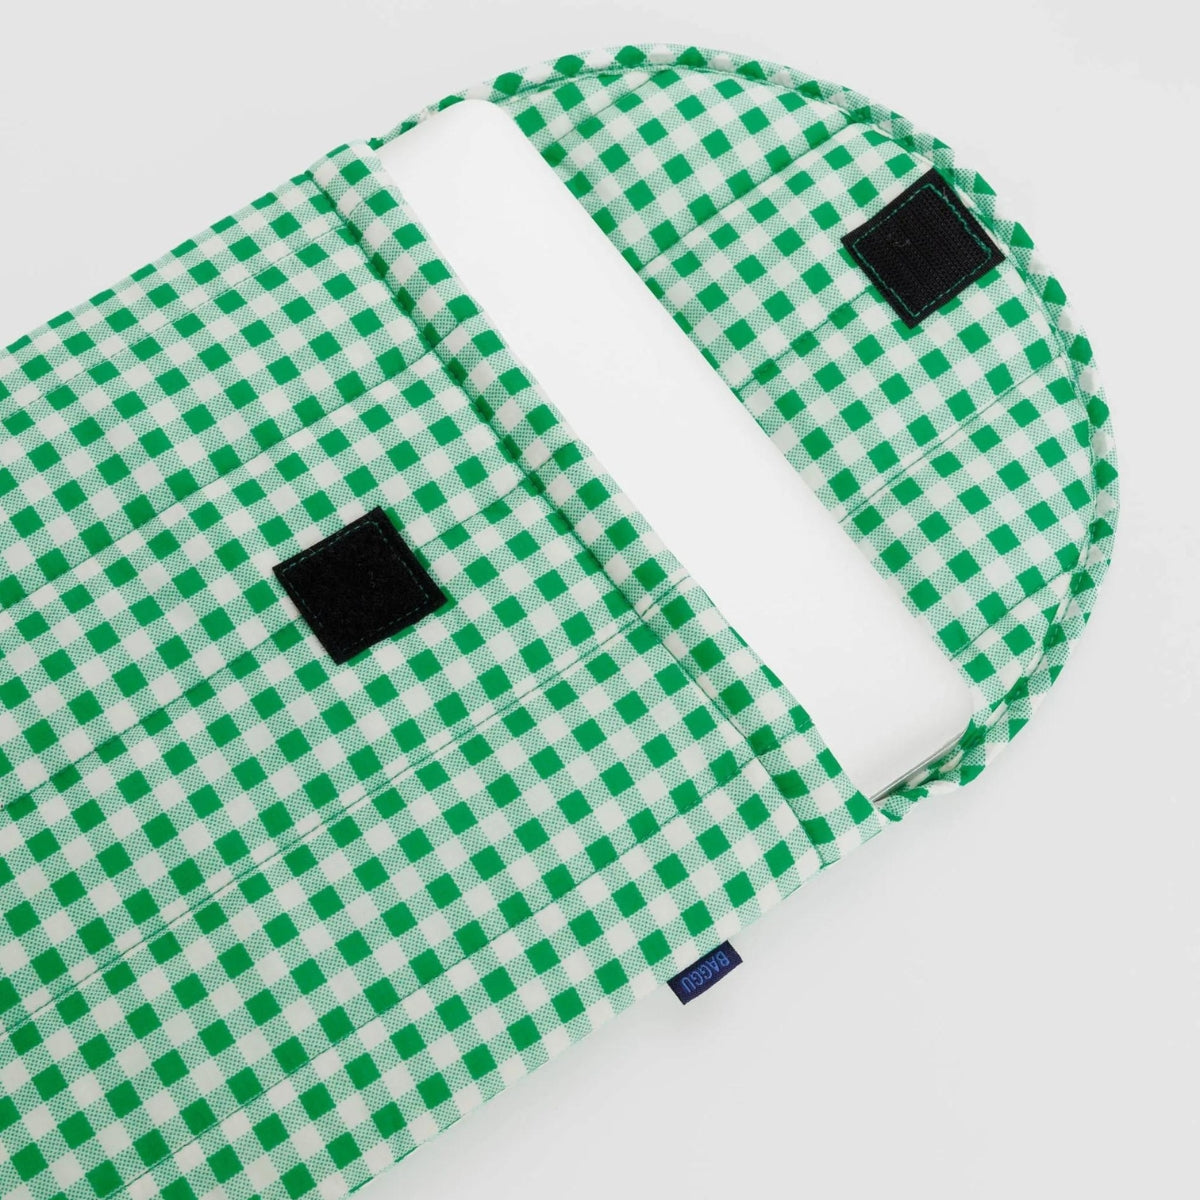 Baggu Puffy Laptop Sleeve 16&quot; in Green Gingham